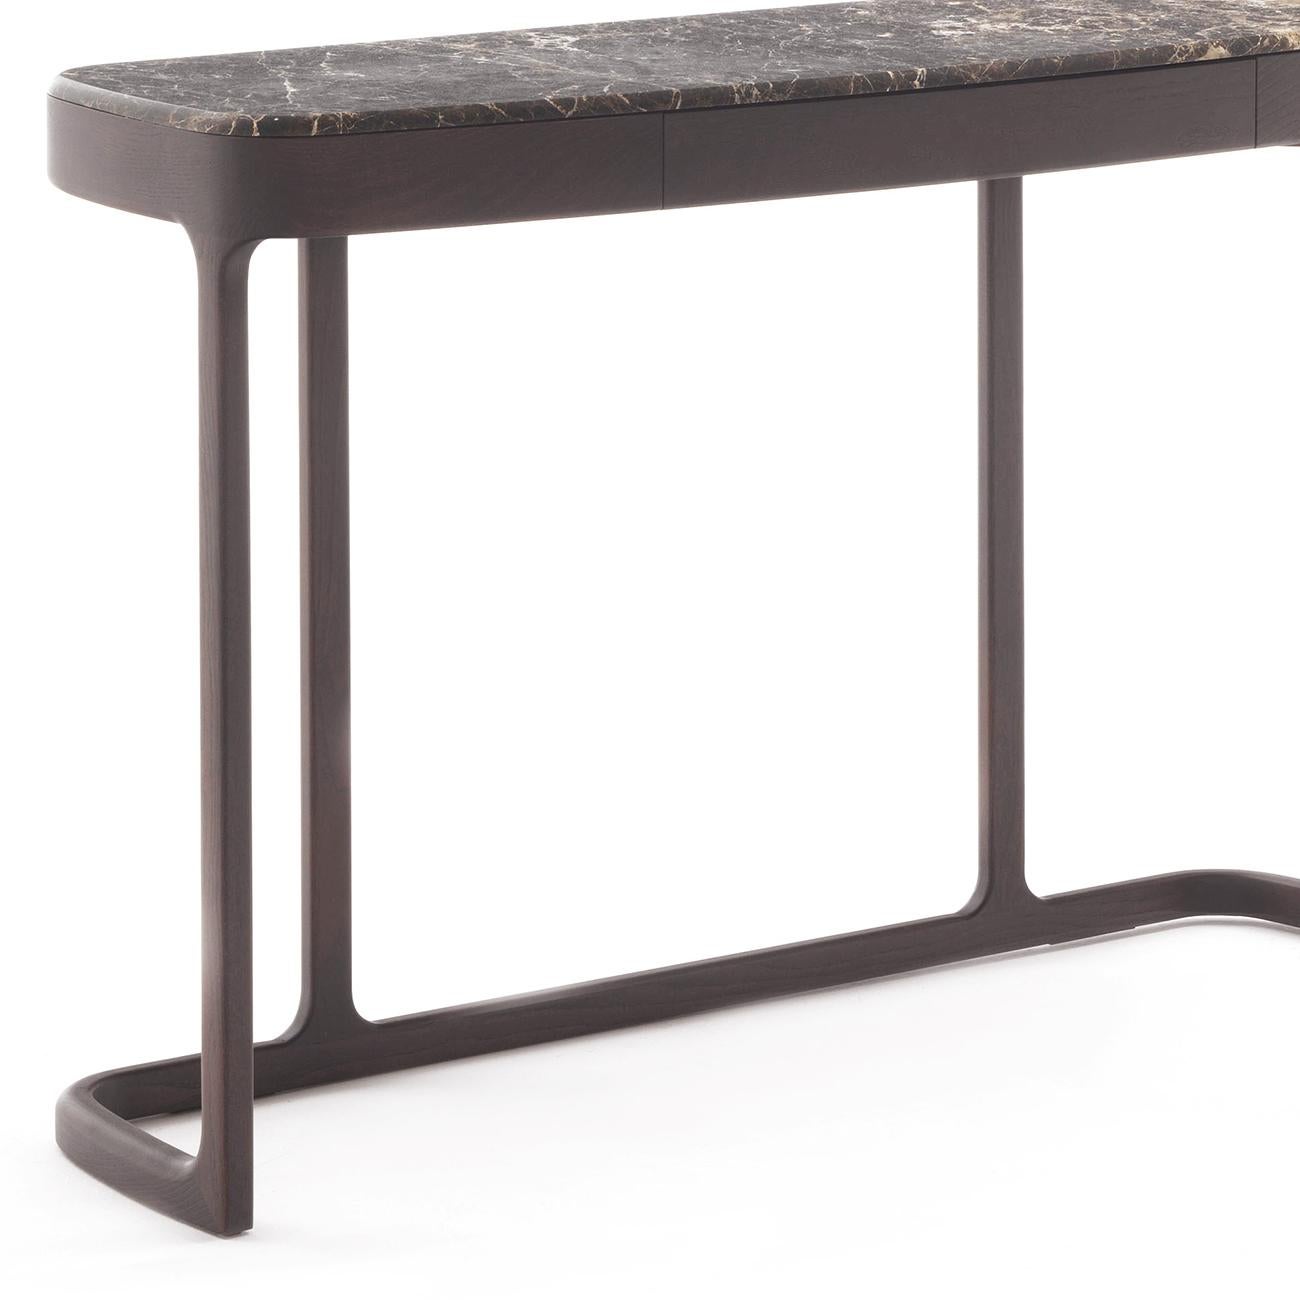 Console table Samena with structure in solid ashwood,
With 1 drawer and with top in Italian brown emperador marble.
Also available on request with white calacatta marble or with
black sahara marble, price: 8950,00€